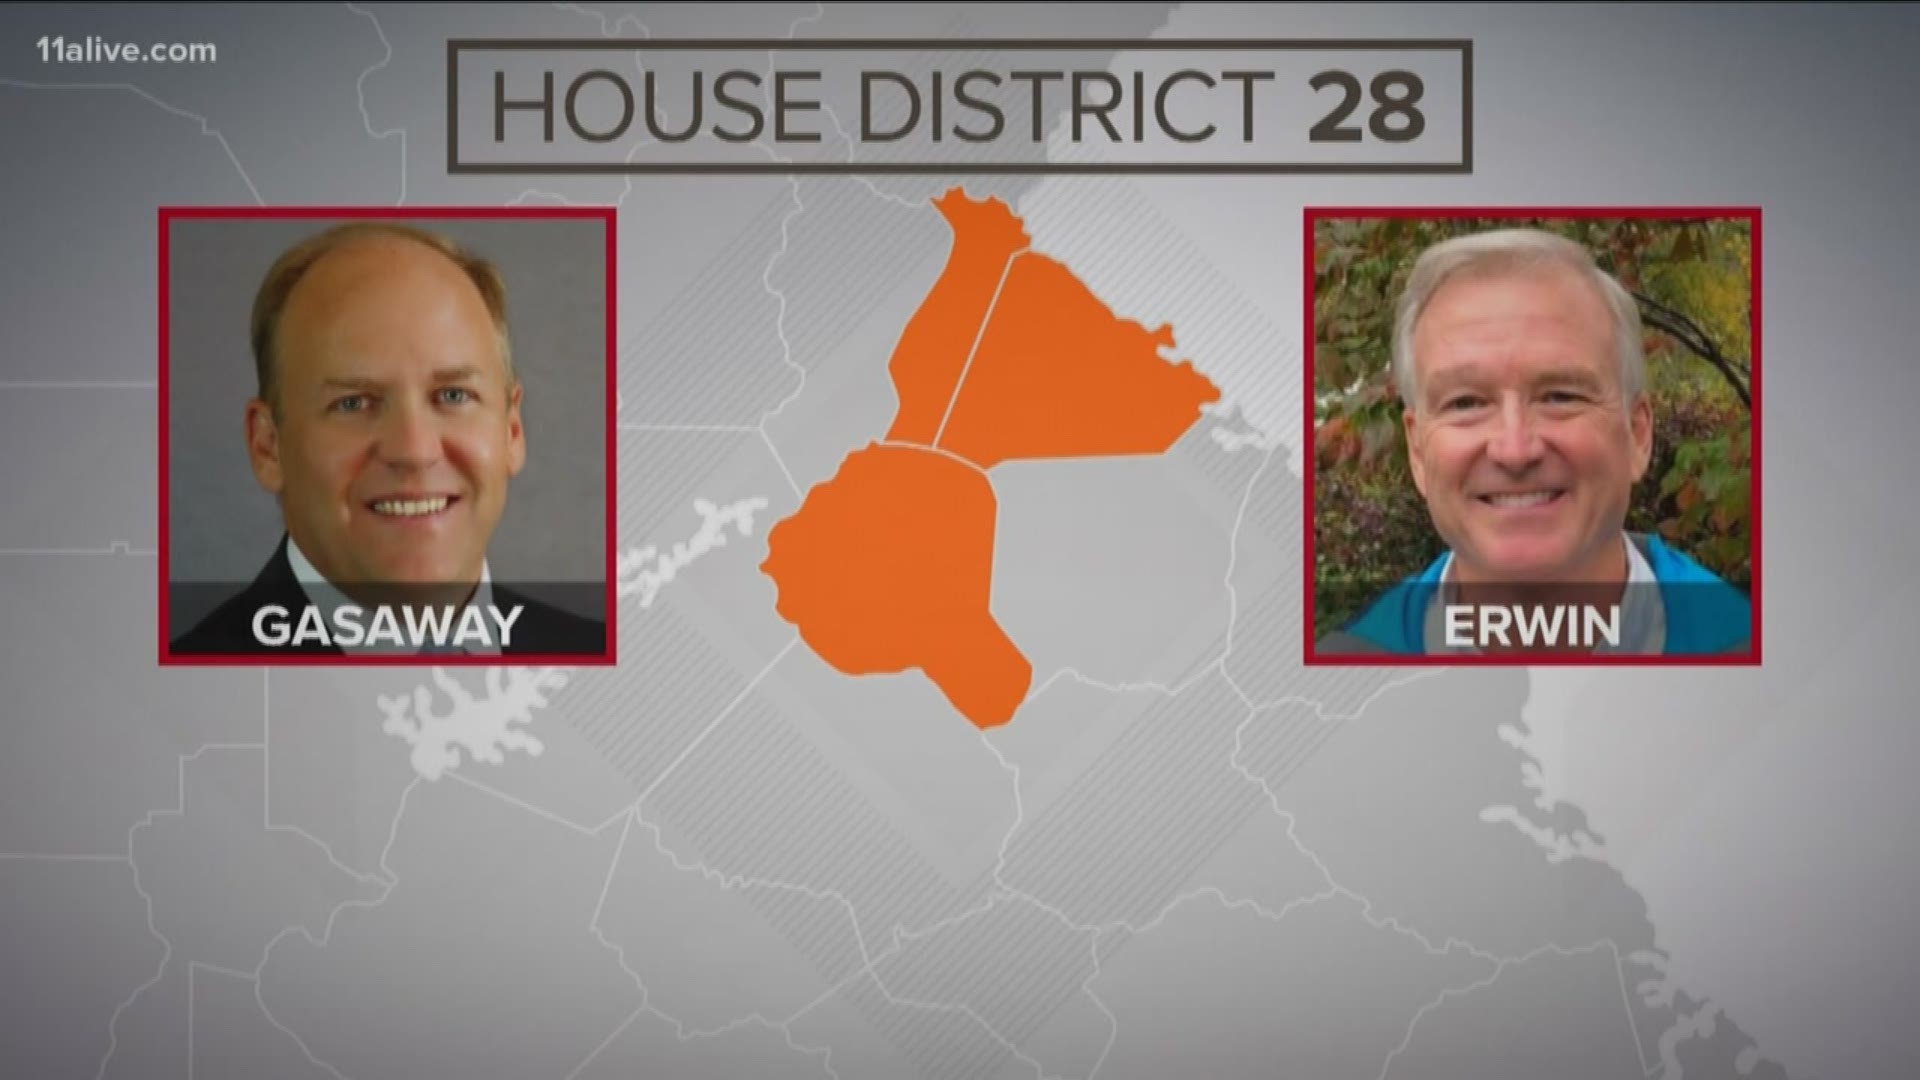 Dan Gasaway trails Chris Erwin by two votes - down from three following the initial election totals. He'll take the weekend to decide if he'll request a recount.